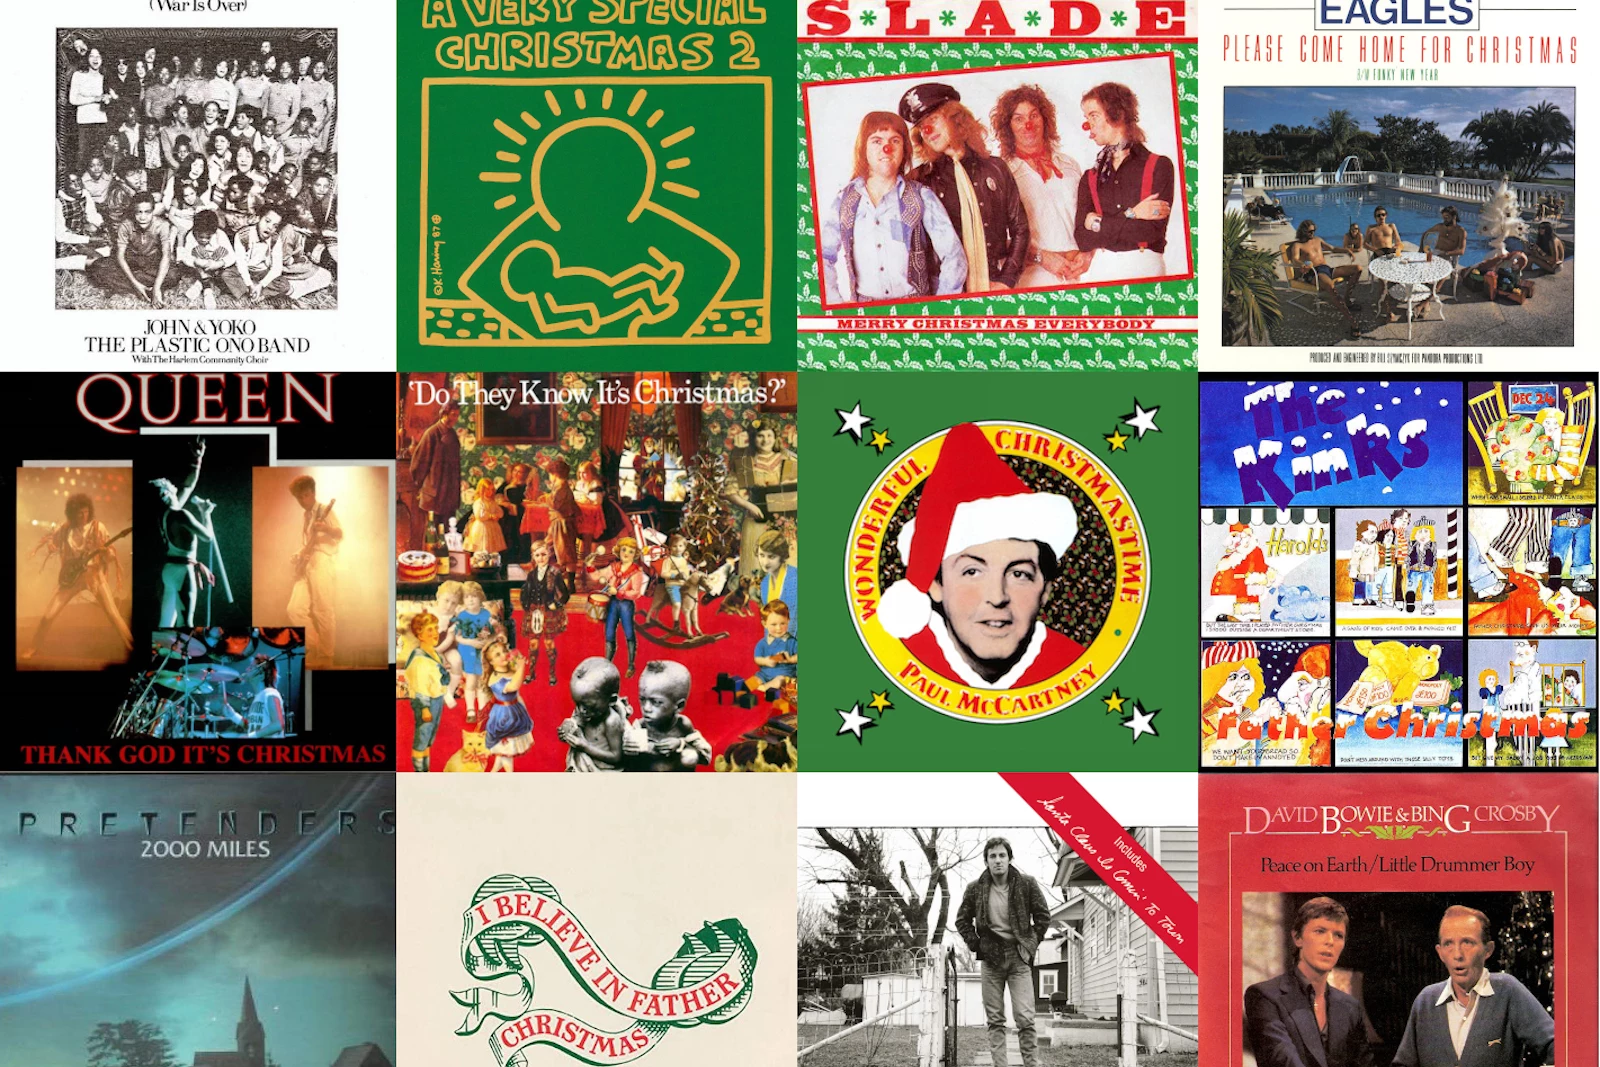 Classics and more: The most popular Christmas songs in 2021, ranked